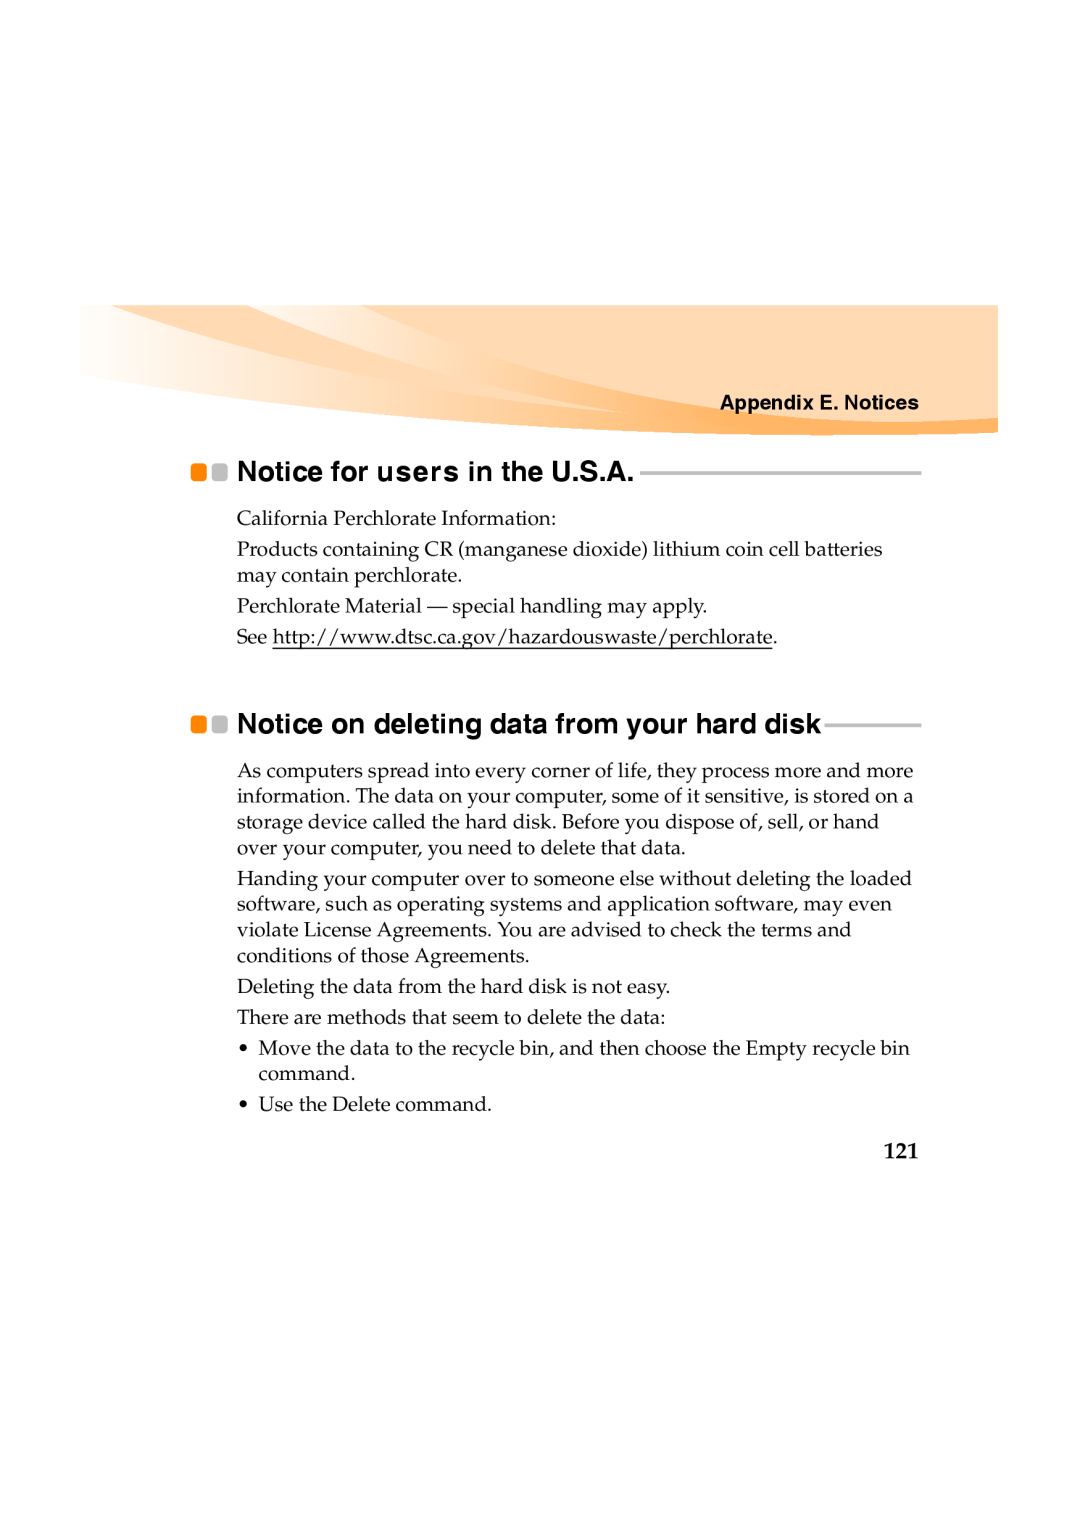 Lenovo Y460 manual Notice on deleting data from your hard disk, Notice for users in the U.S.A, Appendix E. Notices 